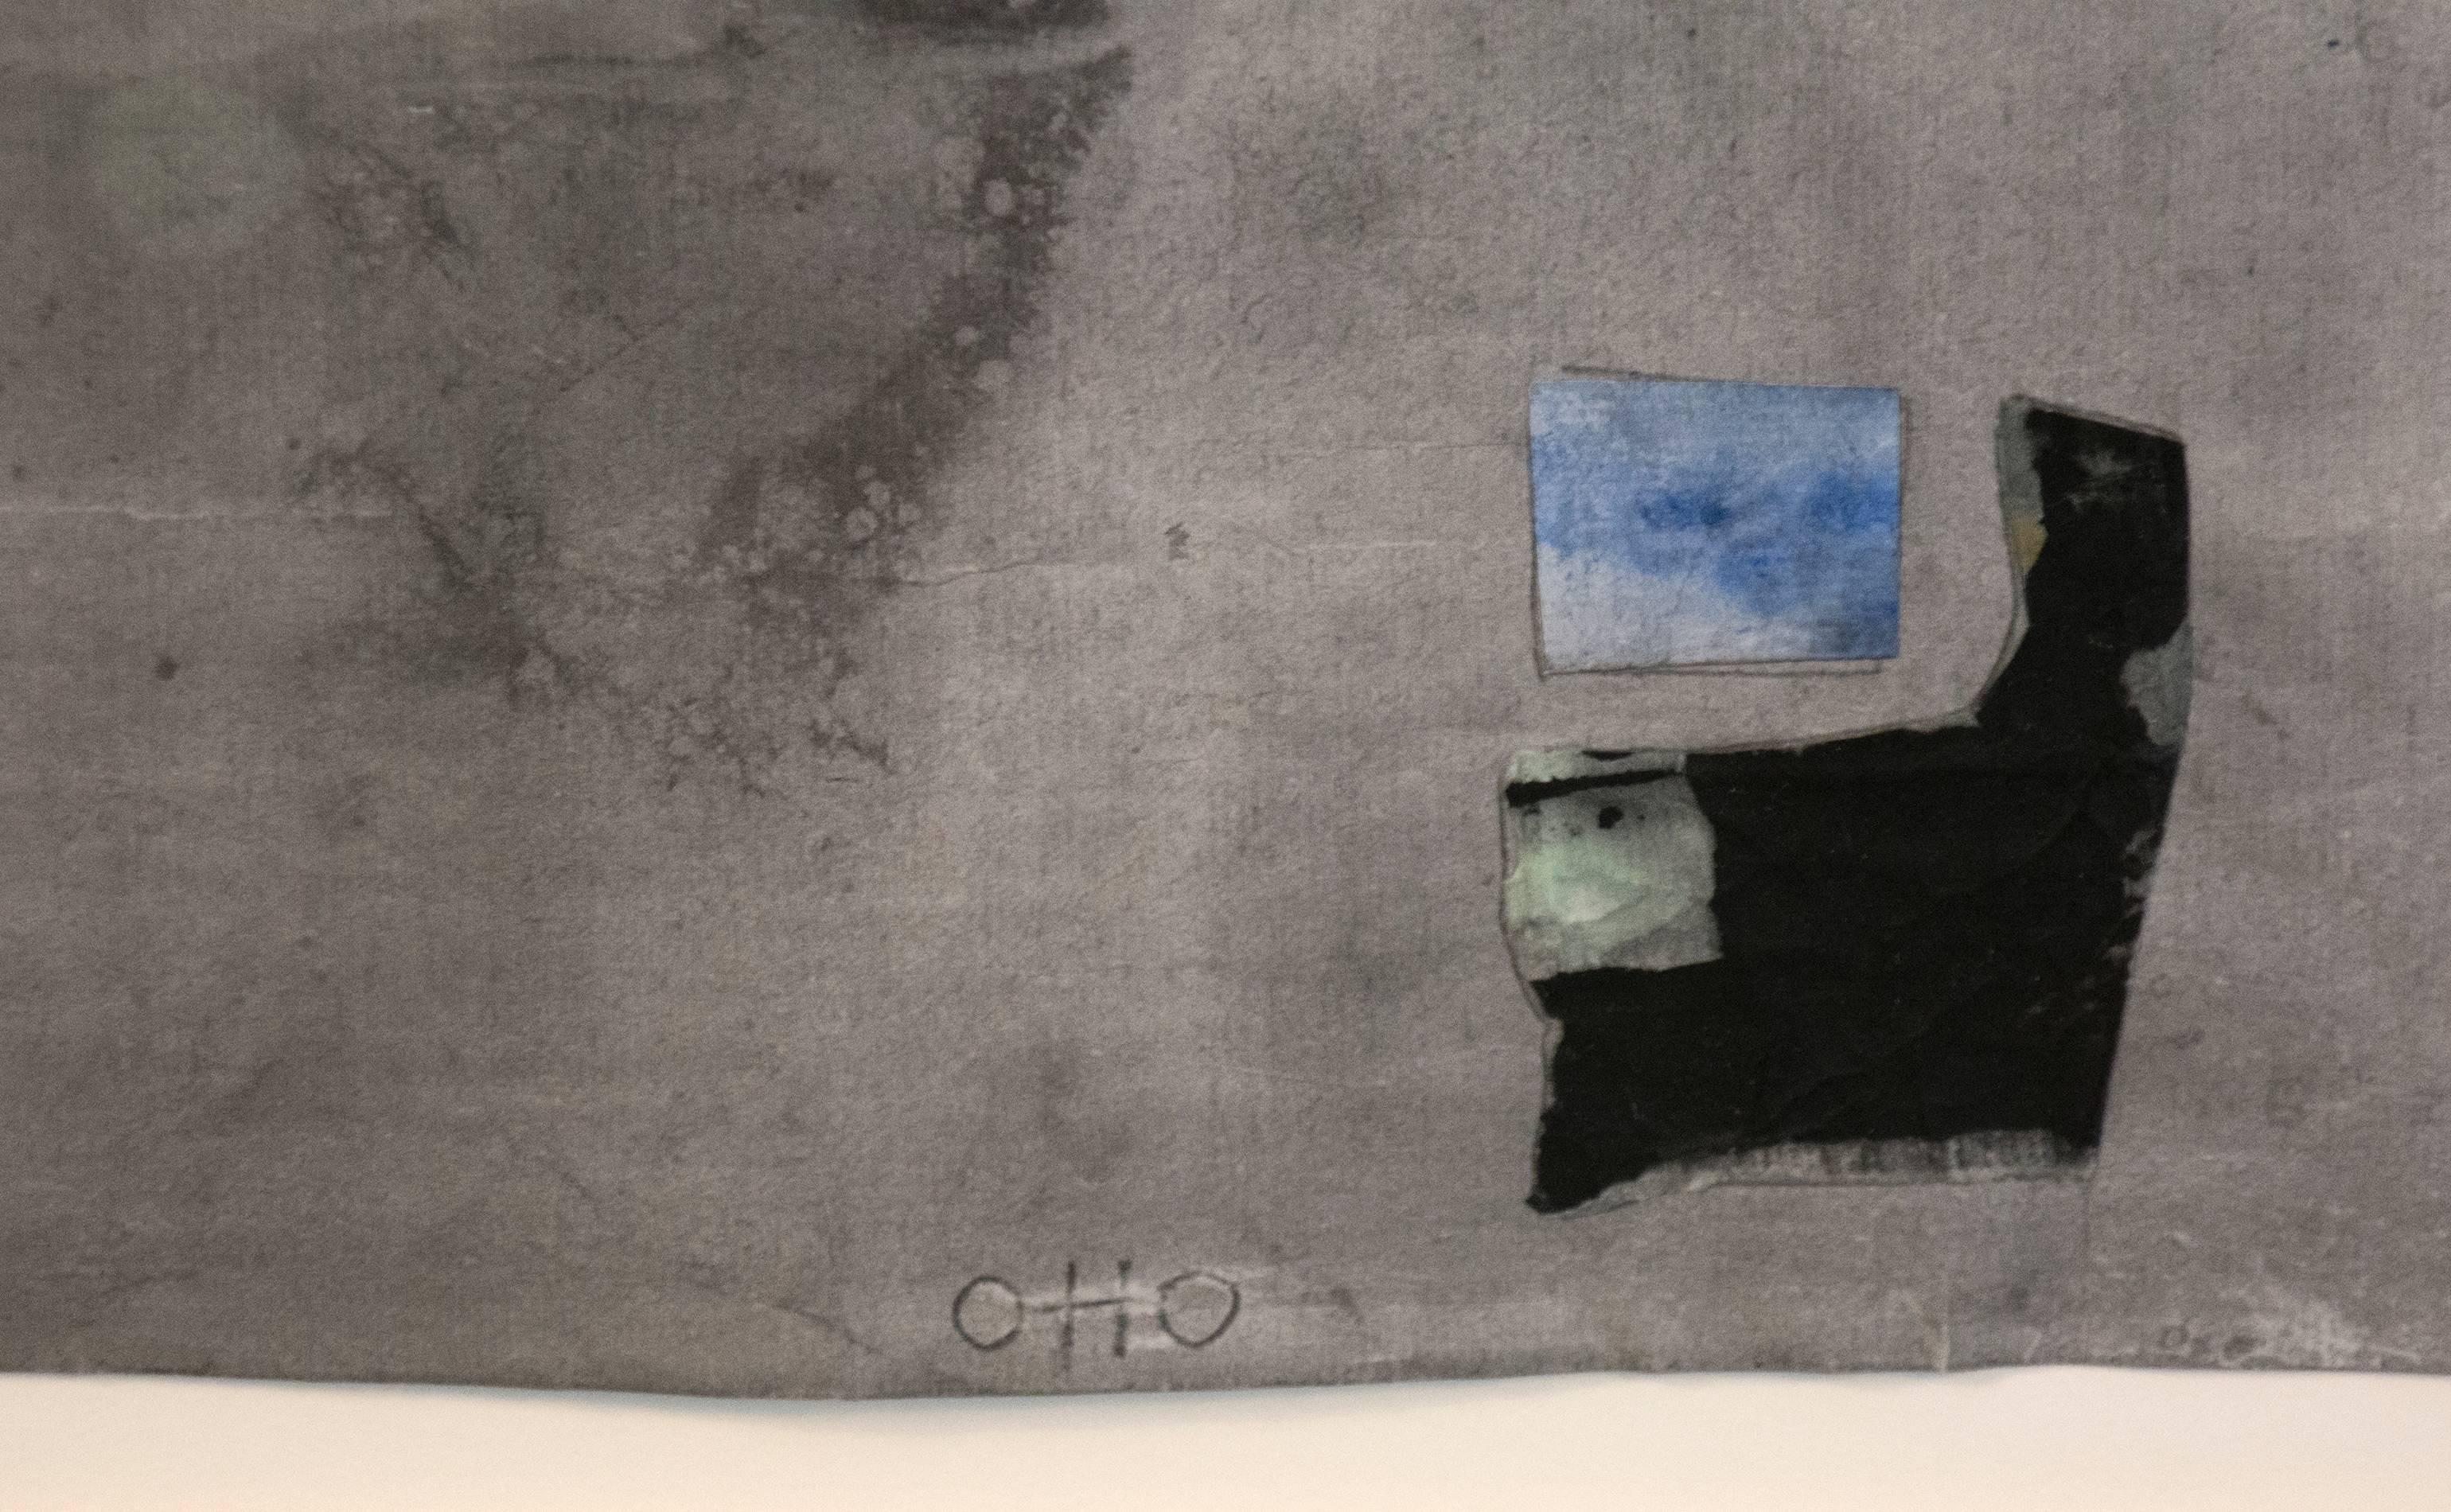 Watercolor and collaged elements , dominantly grey and off-white, with small notes of blue, pale green. On Japanese paper.

Otto Donald Rogers was born in 1935 in Kerrobert, Saskatchewan and currently resides in Prince Edward County, Ontario.

Otto